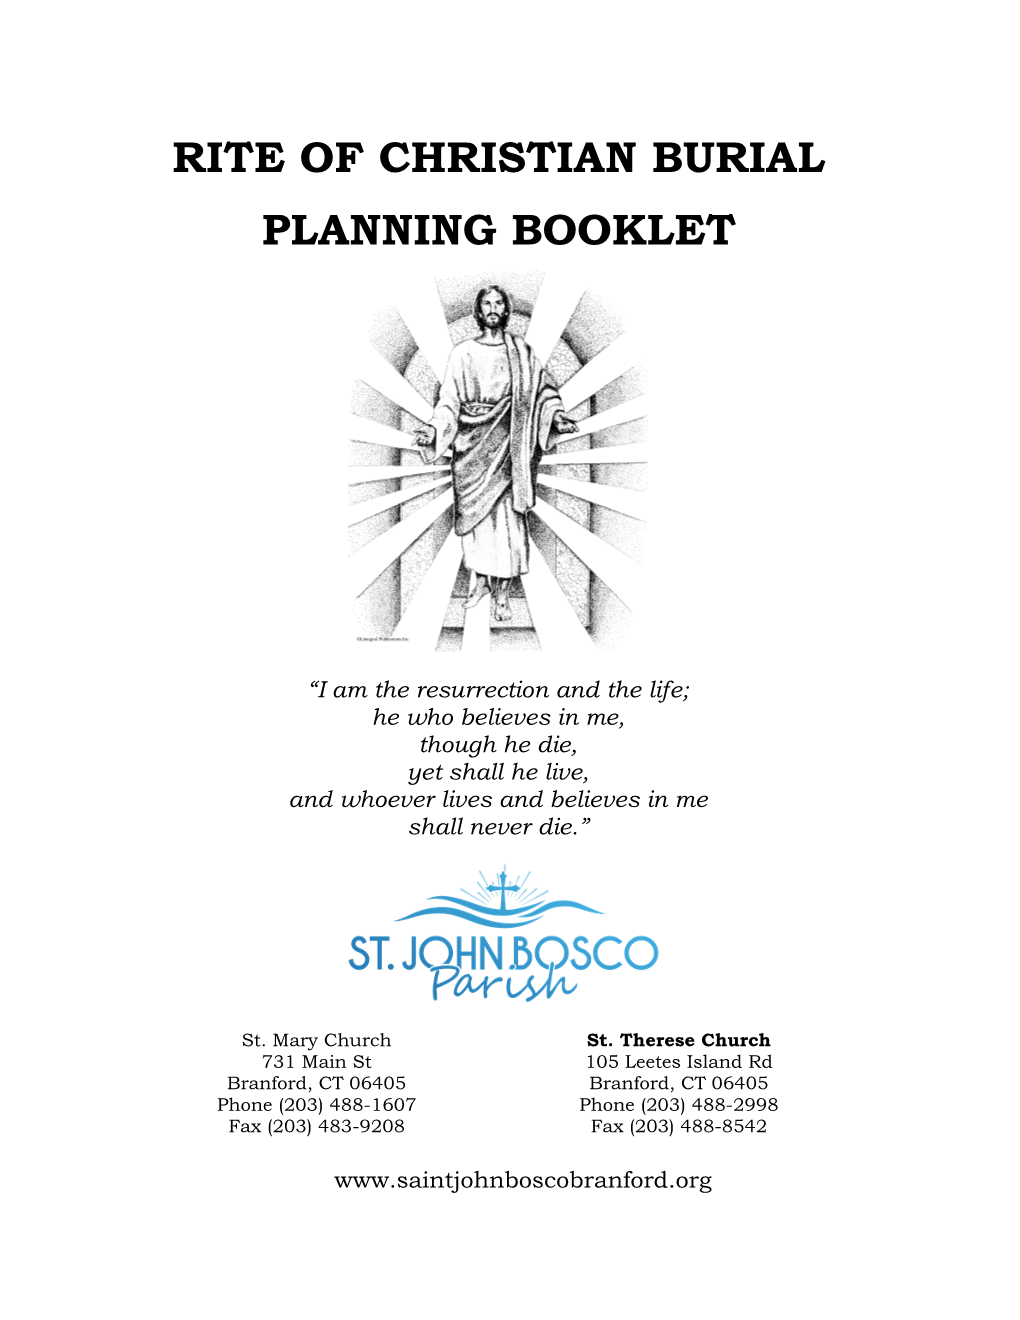 Rite of Christian Burial Planning Booklet